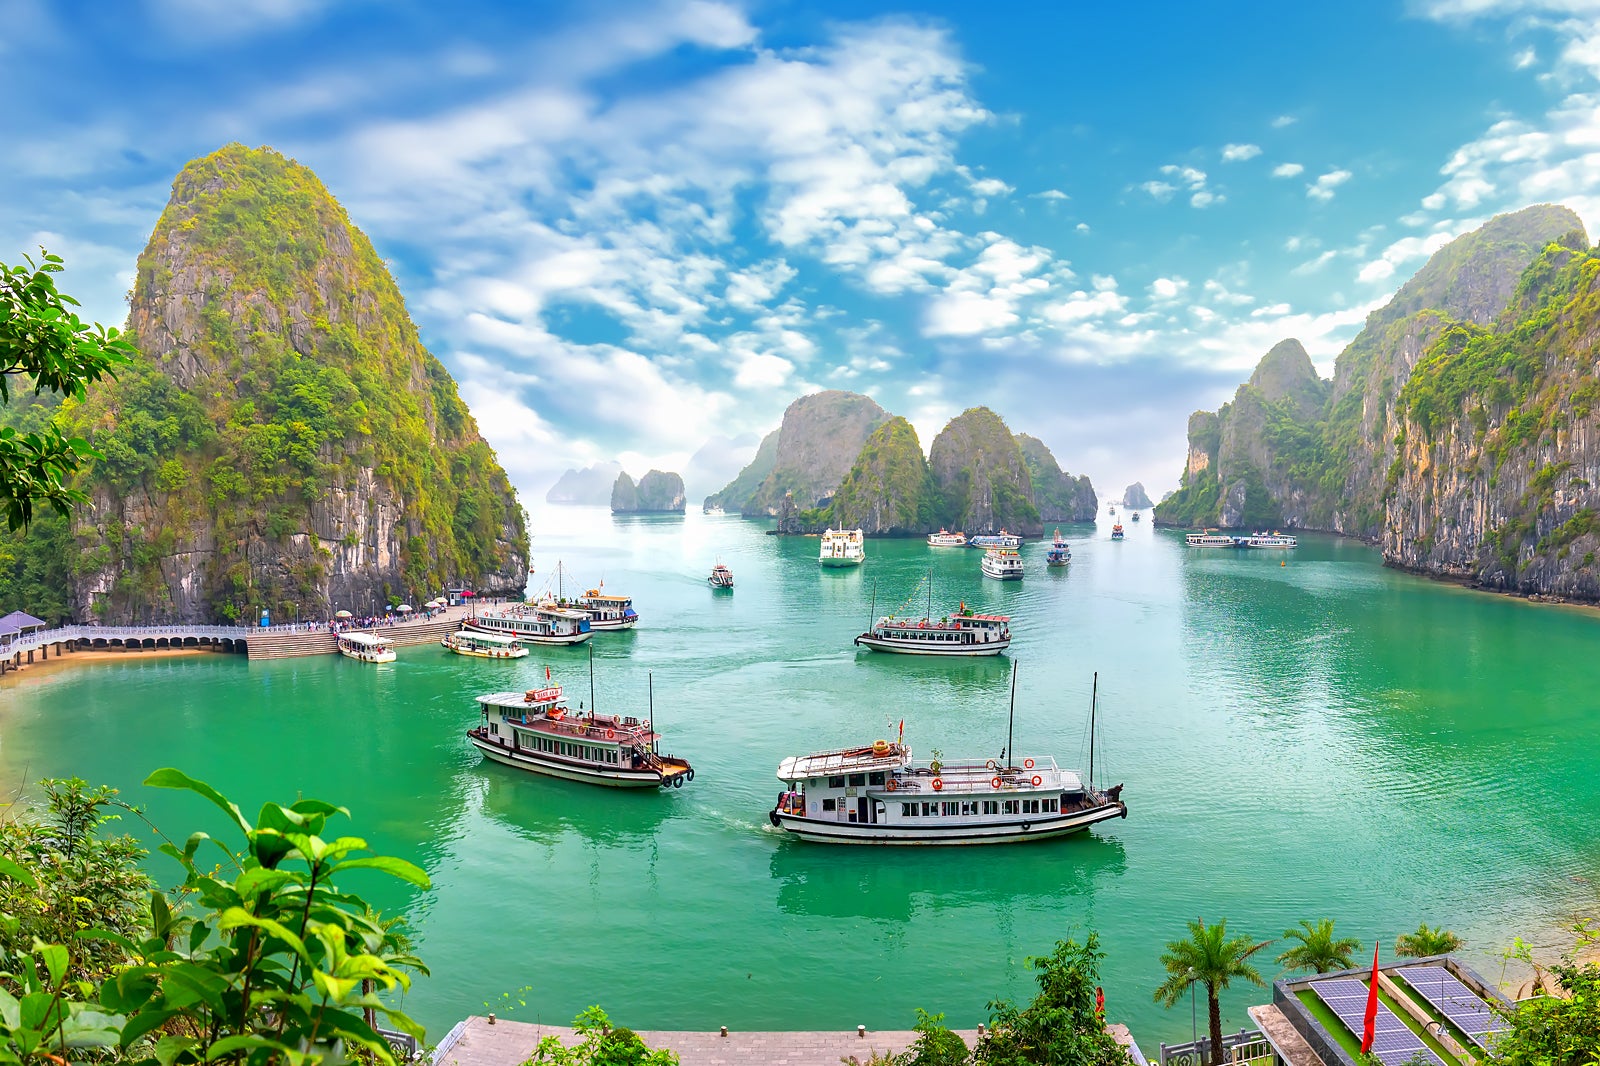 Ha Long Bay Cruises - Everything You Need to Know About Cruising in Ha Long Bay